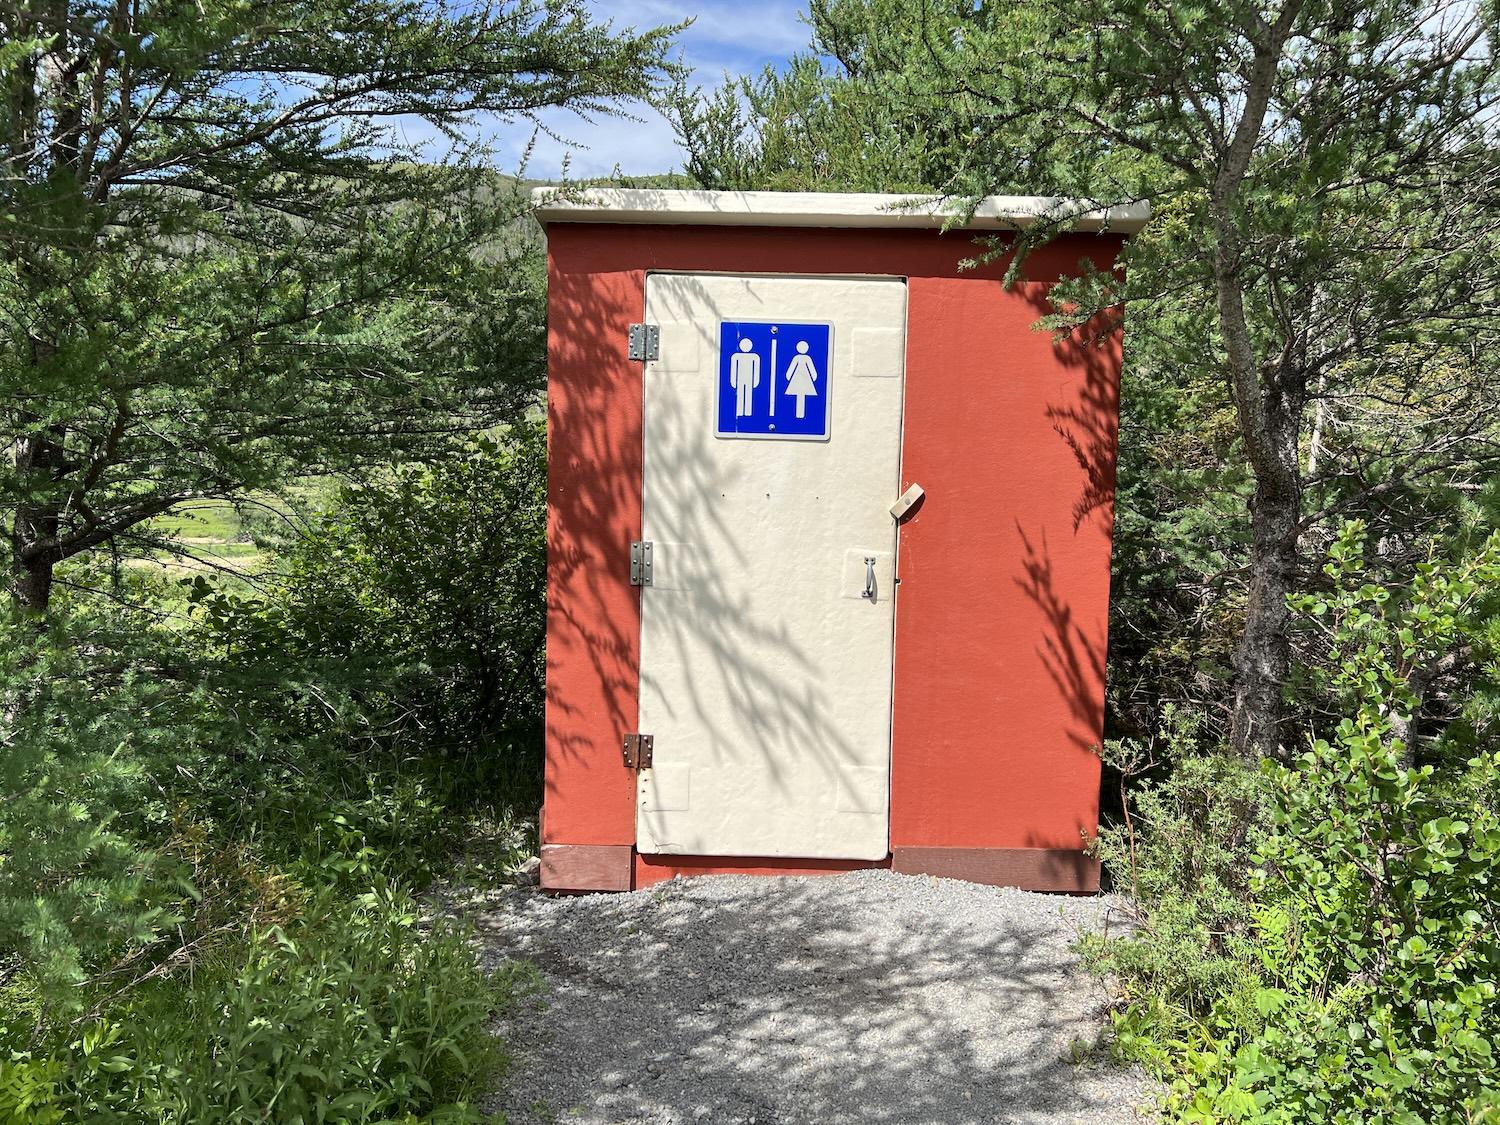 At the Tablelands trail in Gros Morne National Park, a colourful washroom.